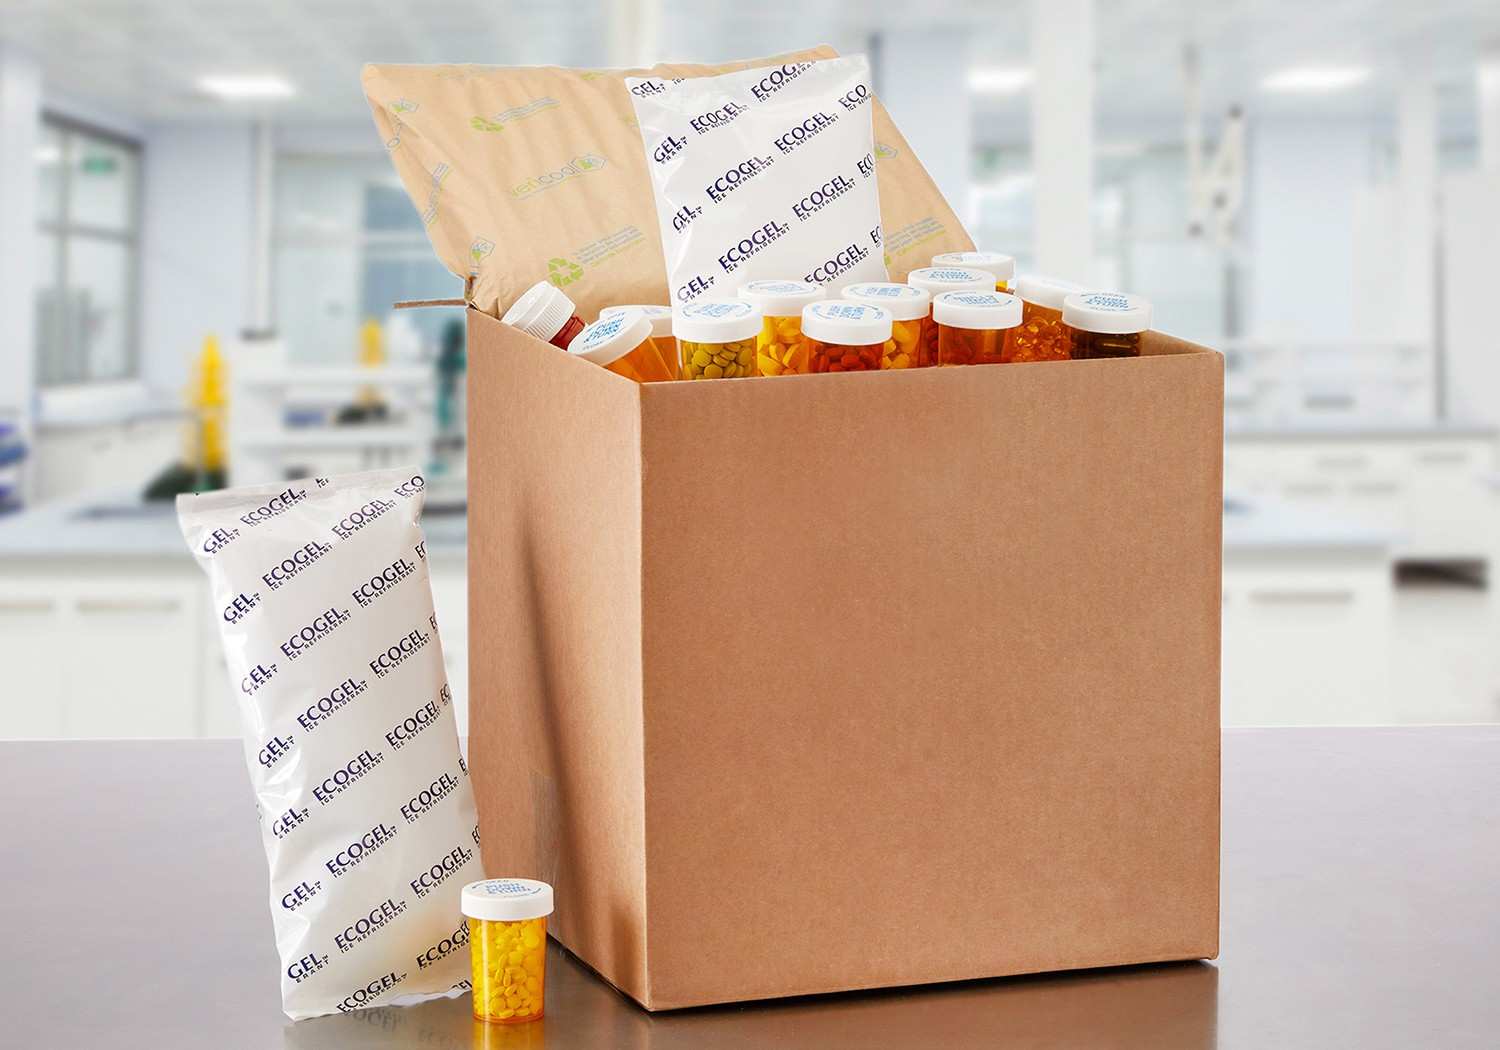 a picture of ecogel gel packs with a pharmacy delivery box